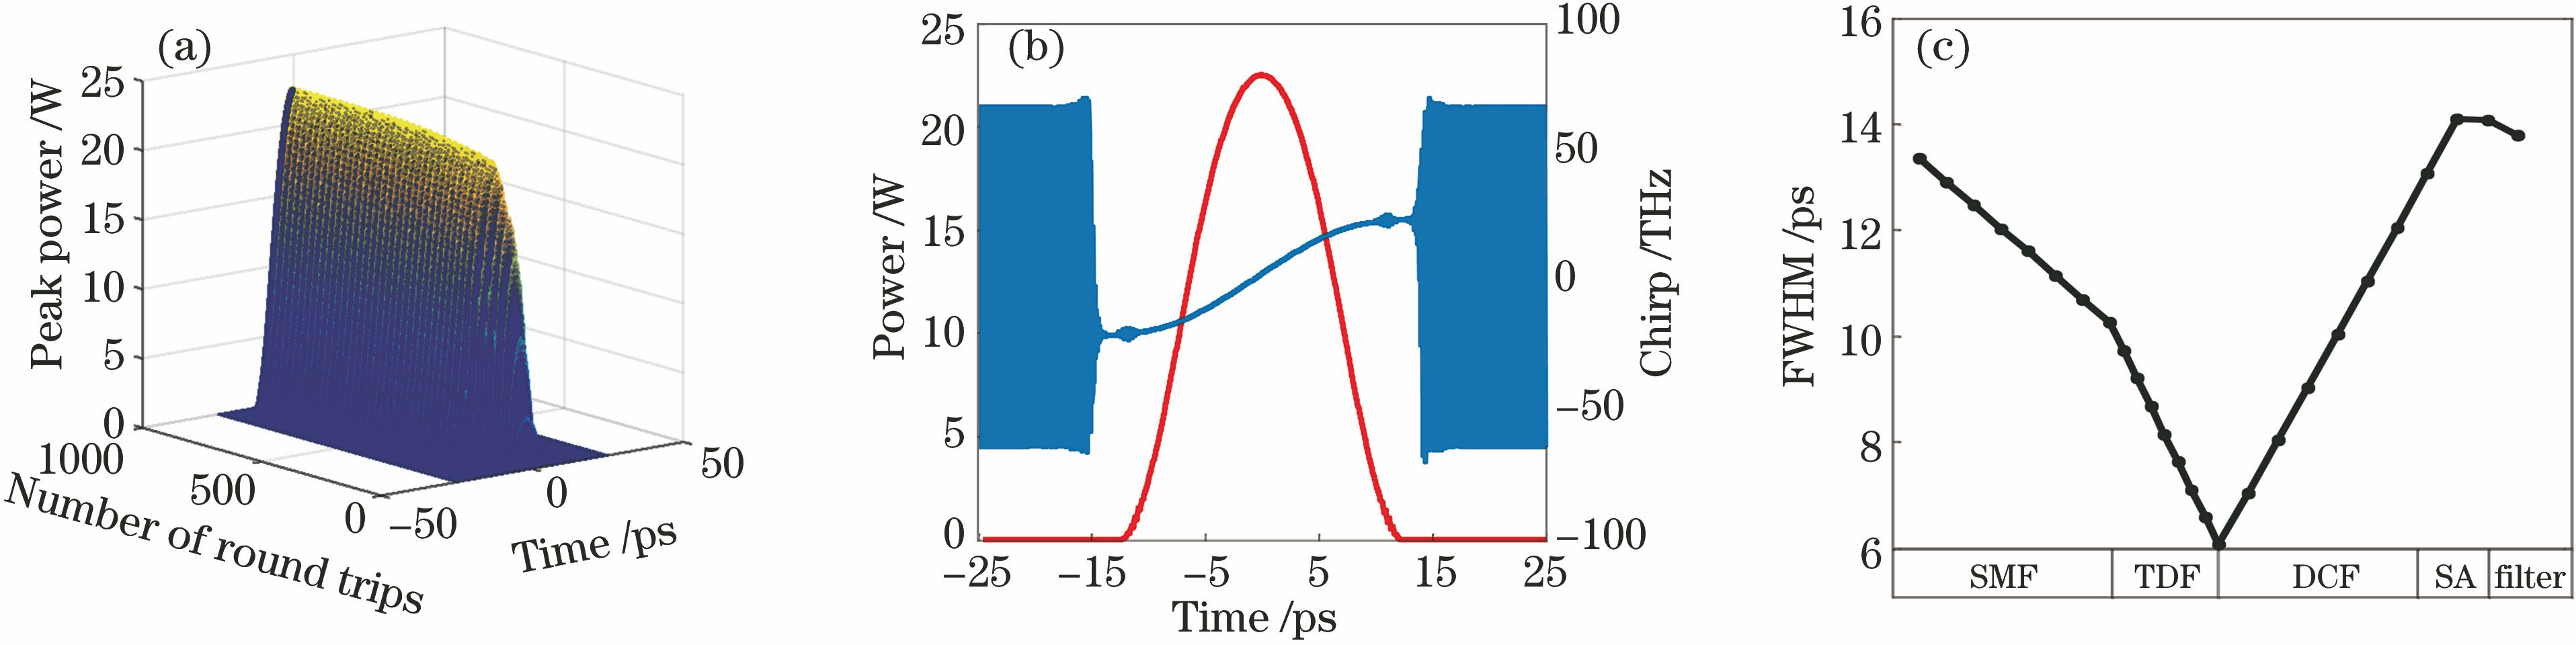 Time domain graphs of self-similar pulse. (a) Pulse evolution graph; (b) output monopulse and chirp curve; (c) change of pulse FWHM at different positions in the cavity